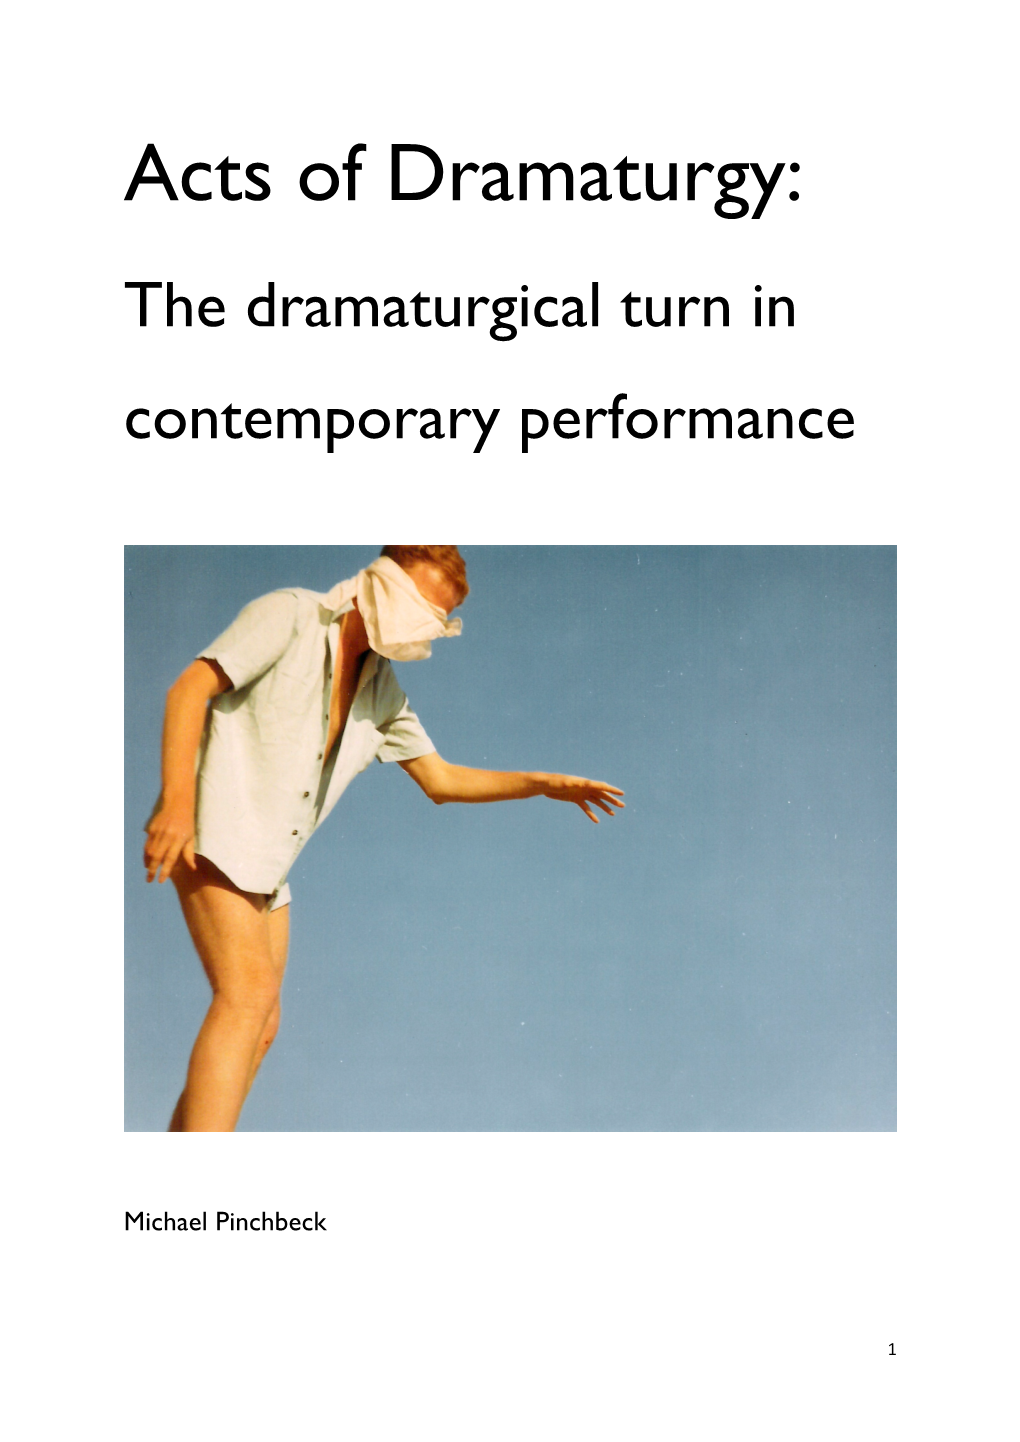 Acts of Dramaturgy: the Dramaturgical Turn in Contemporary Performance